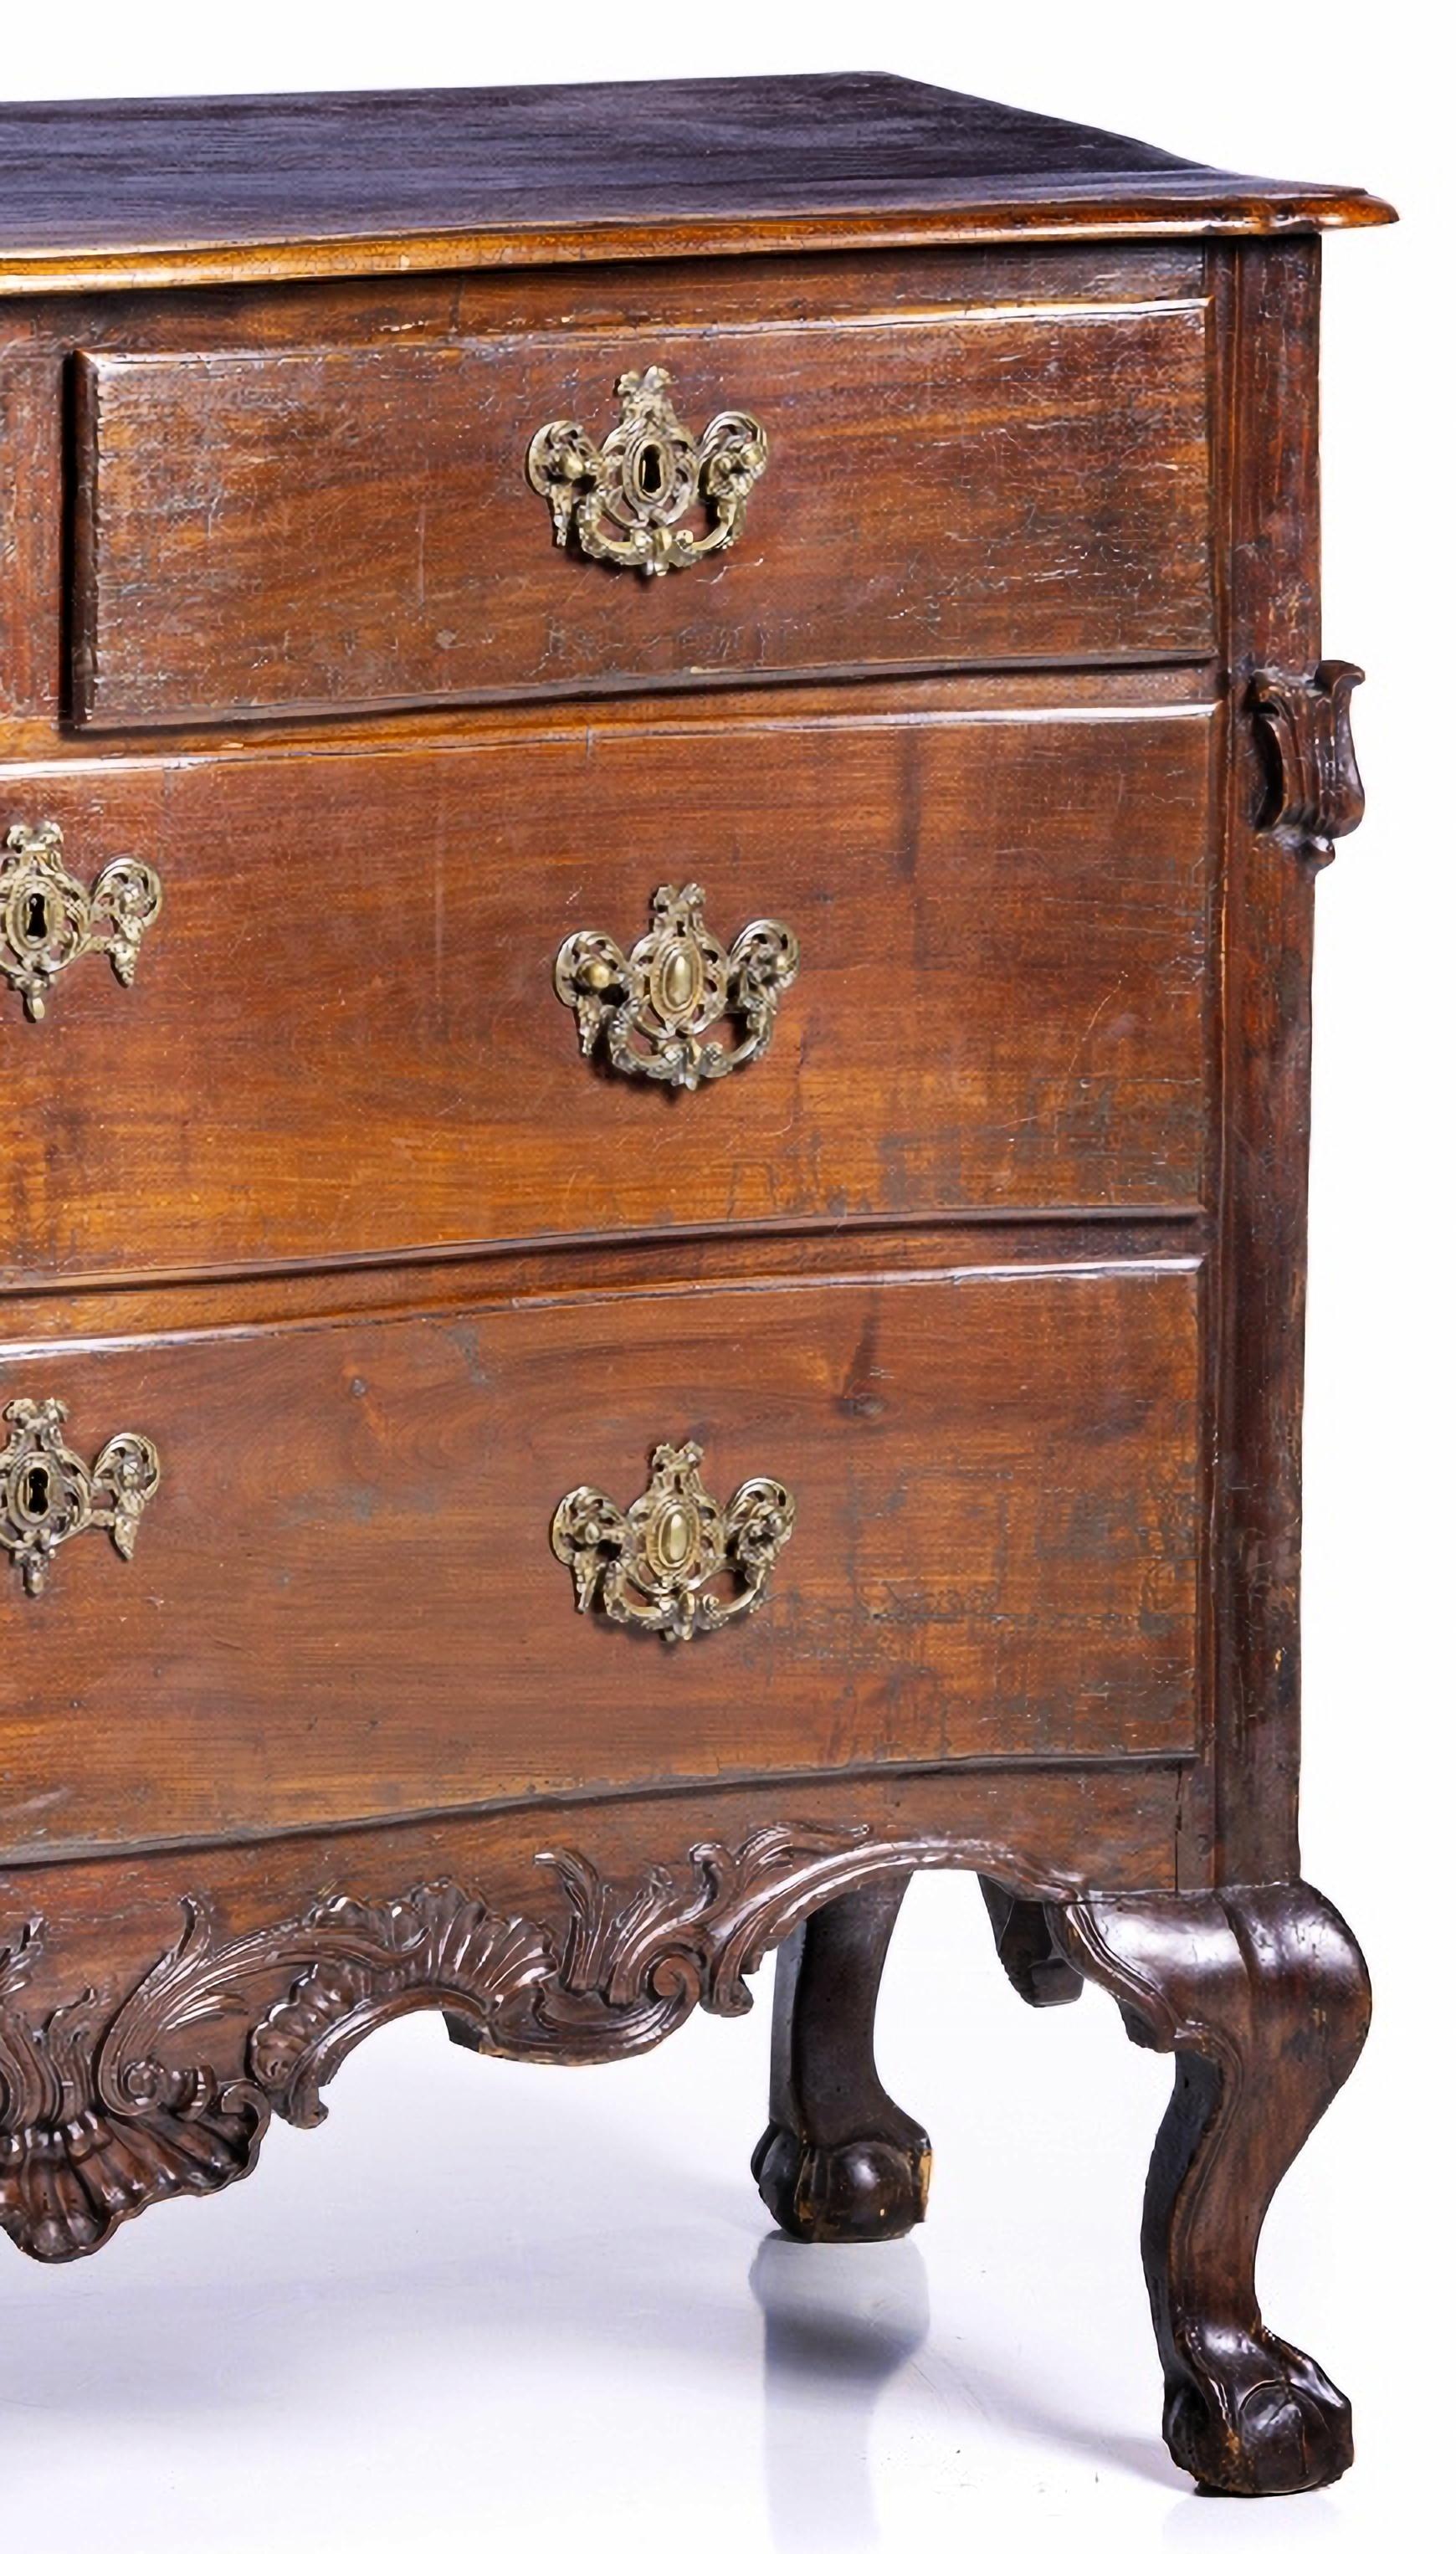 PORTUGUESE CHEST OF DRAWERS 18th Century

in walnut wood with two drawers and two drawers, carved skirts ending in claw and ball feet. Bronze hardware. 
Some defects of the age
Dim.: 94 x 130 x 62 cm
good condition